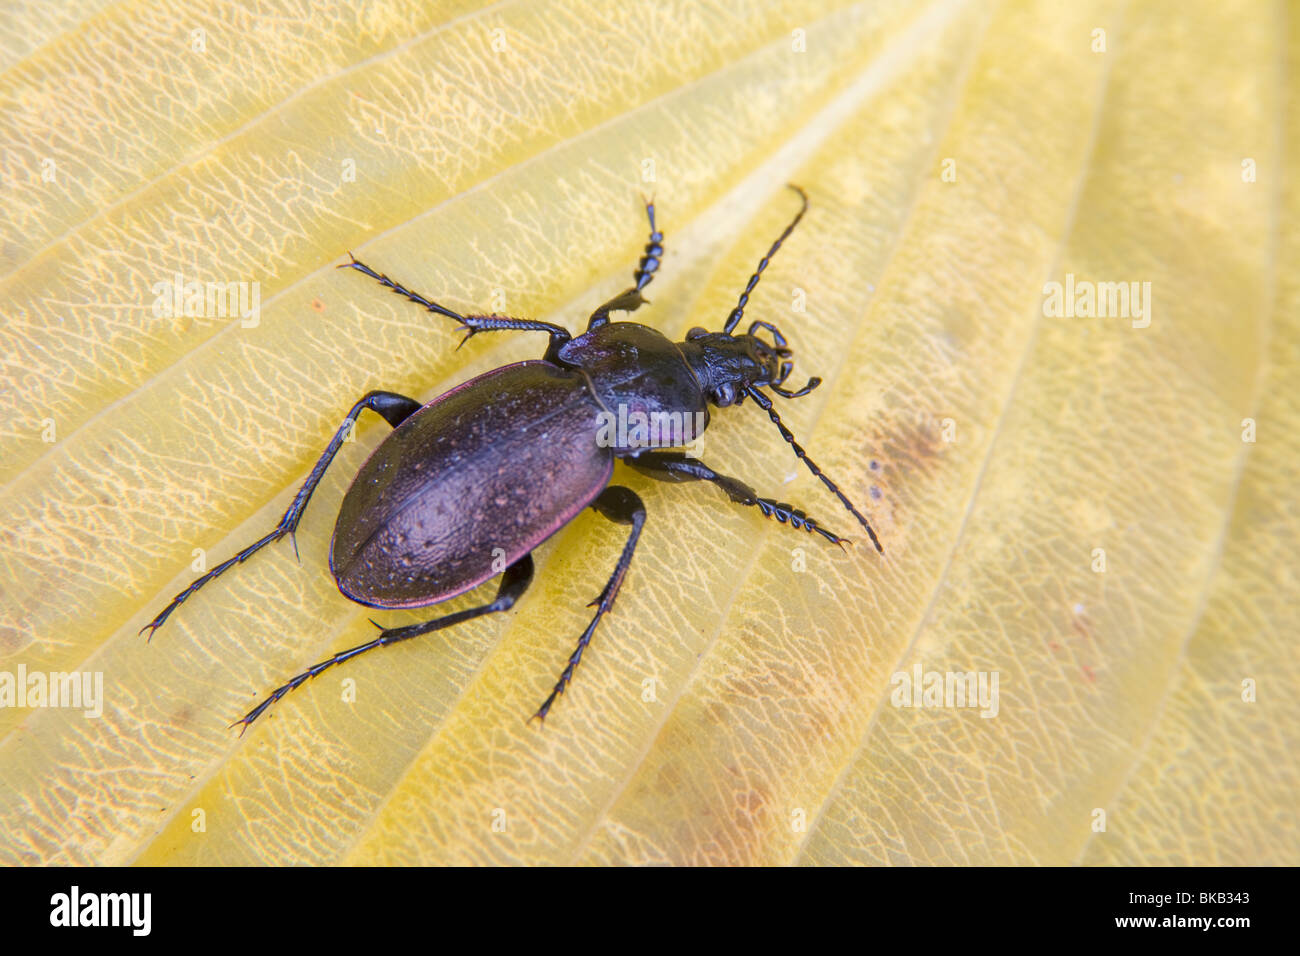 Carabus hortensis Beetle on a leaf Coleoptera Insects Stock Photo